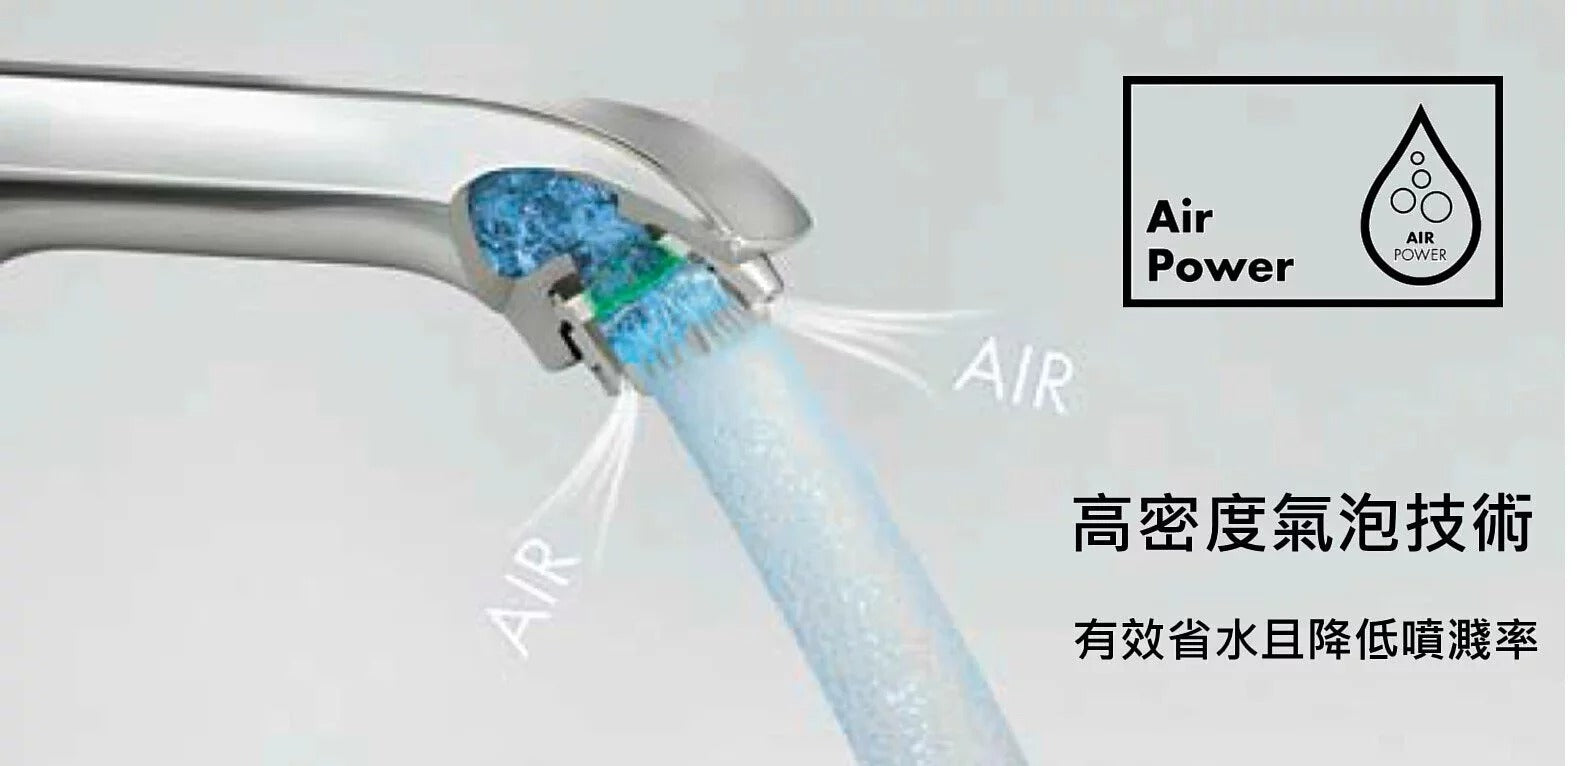 hansgrohe-臉盆龍頭-Logis，71100